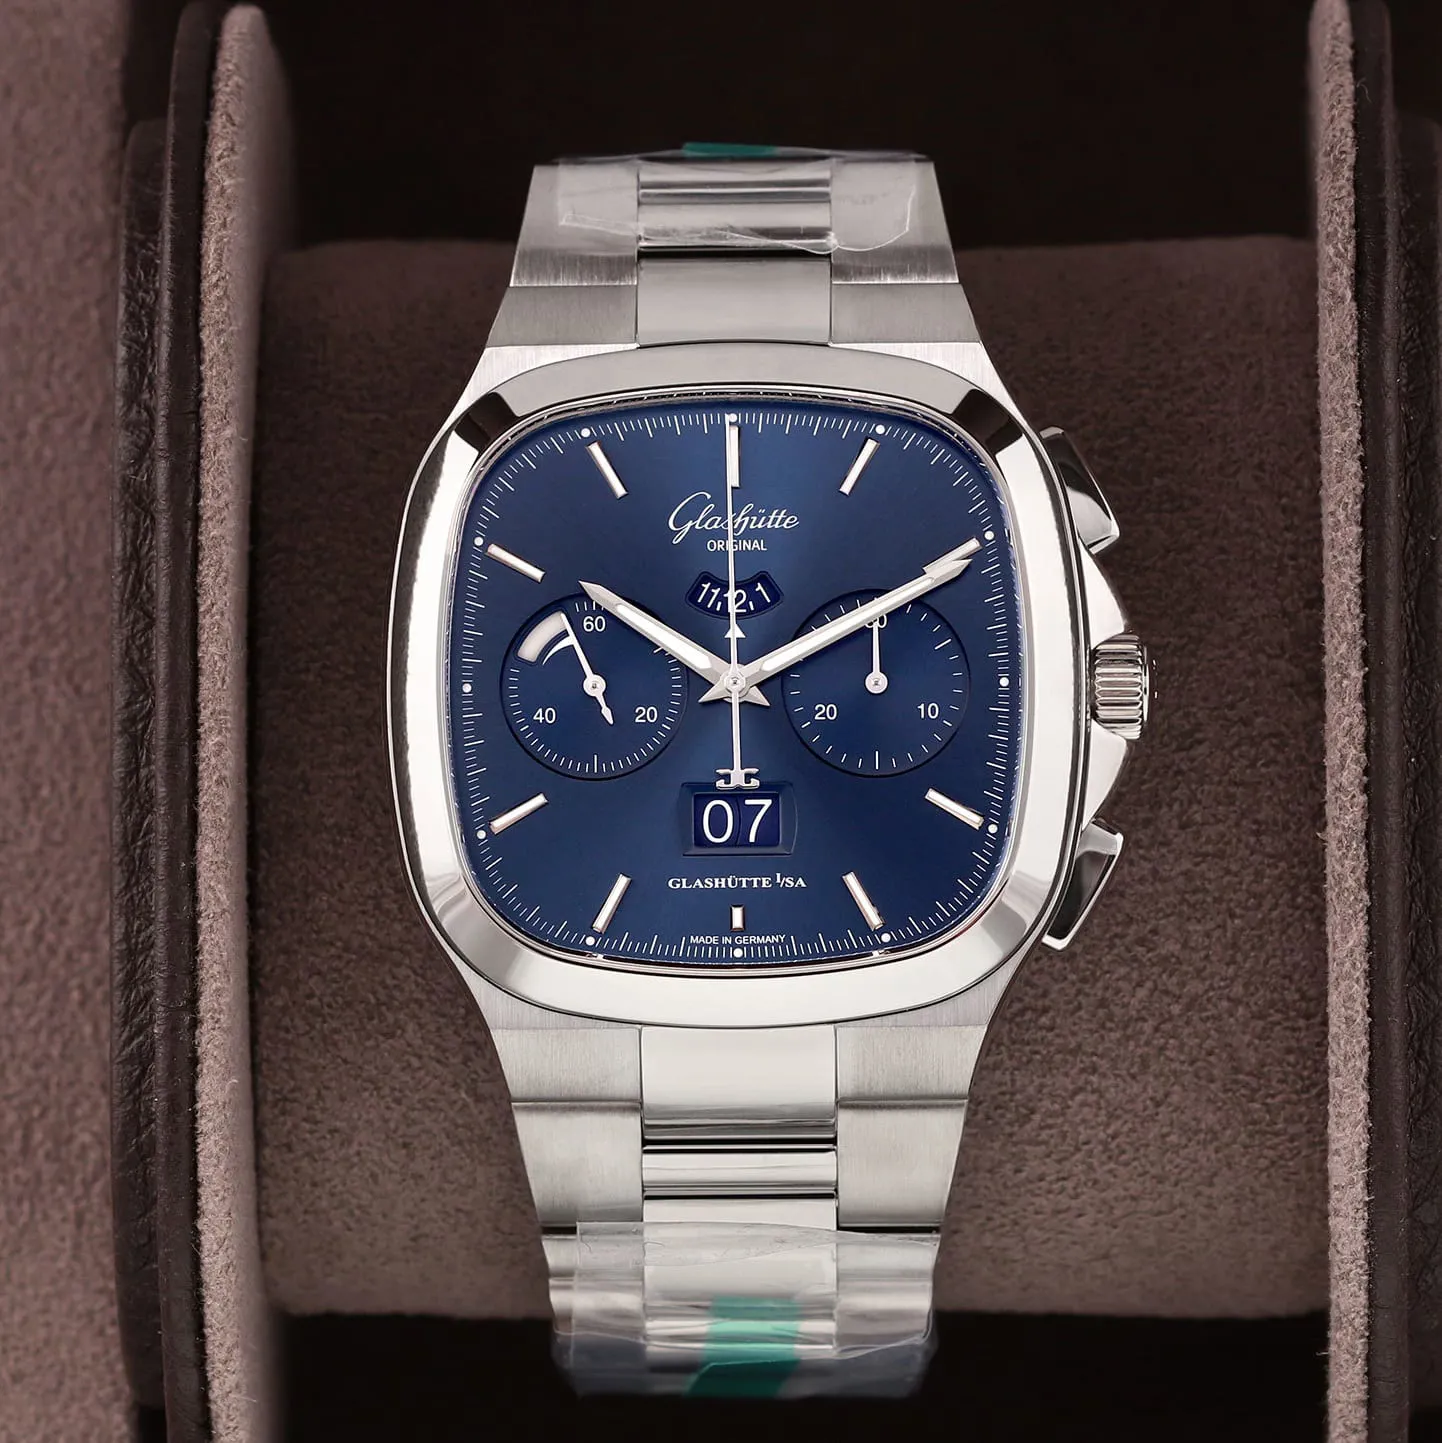 Glashütte Seventies Chronograph Panorama Date 1-37-02-08-02-70 40mm Stainless steel Blue